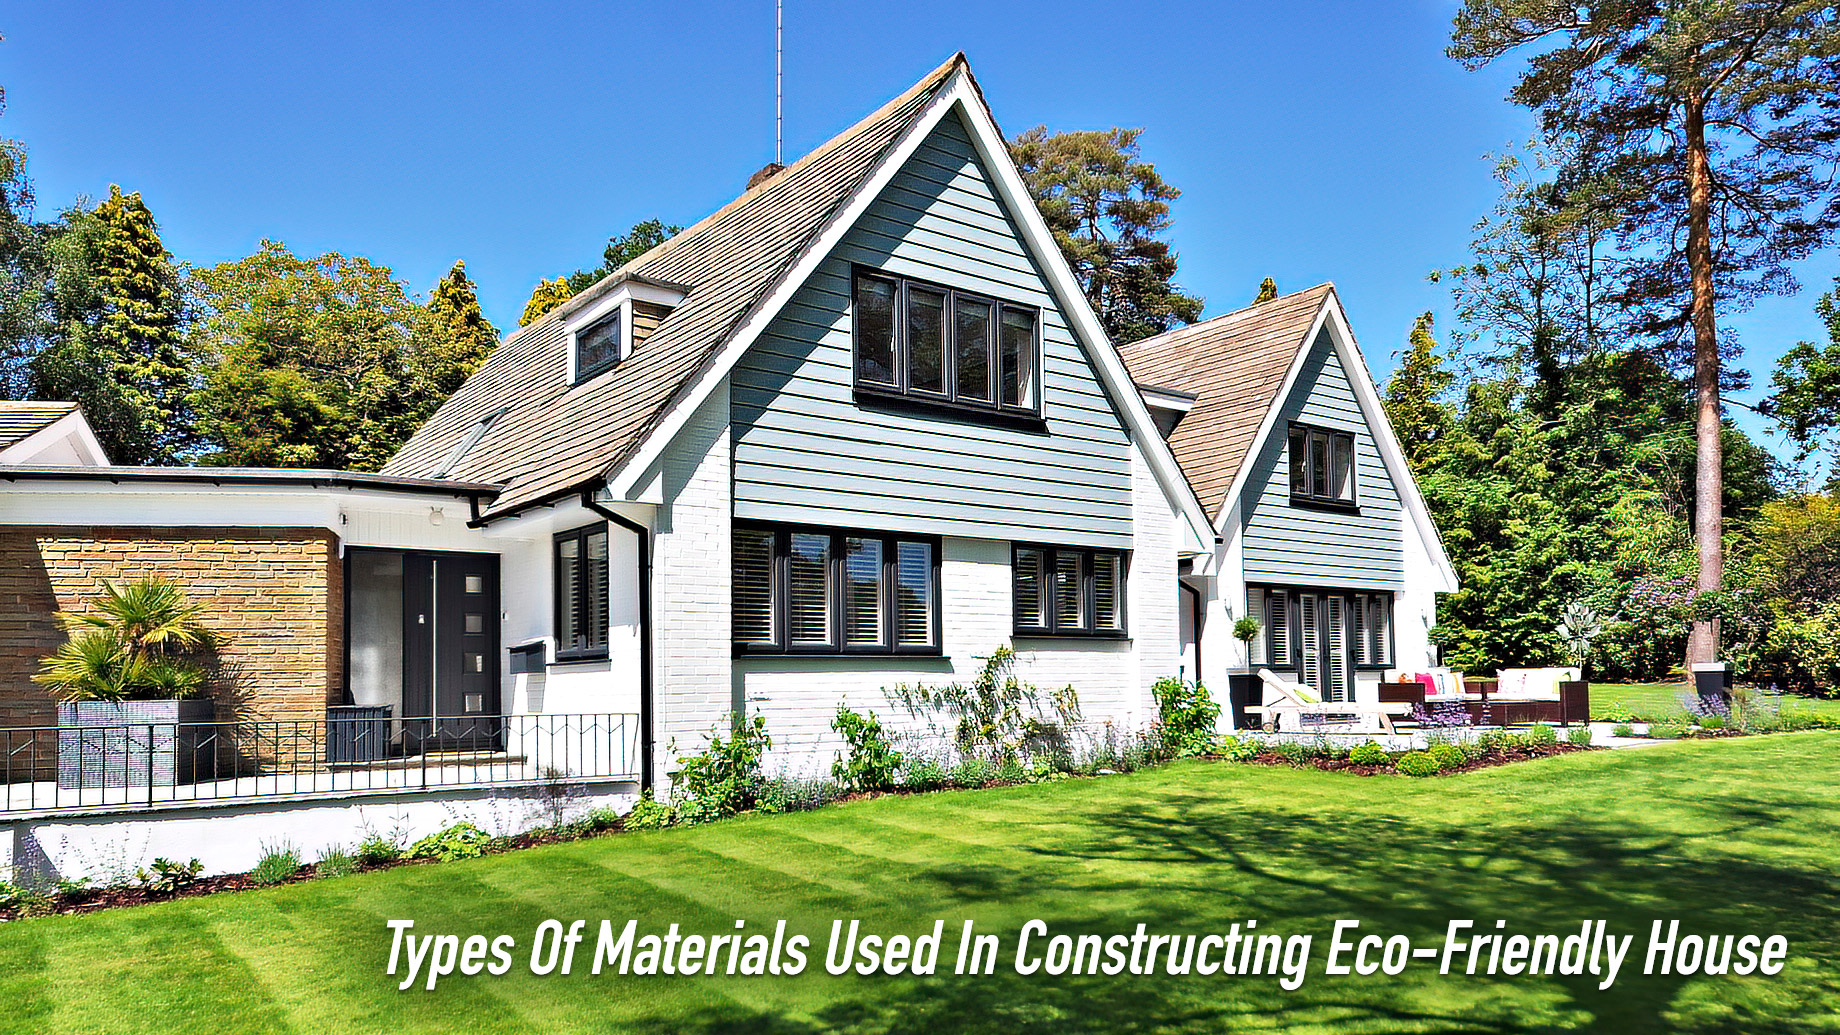 Types Of Materials Used In Constructing Eco-Friendly House